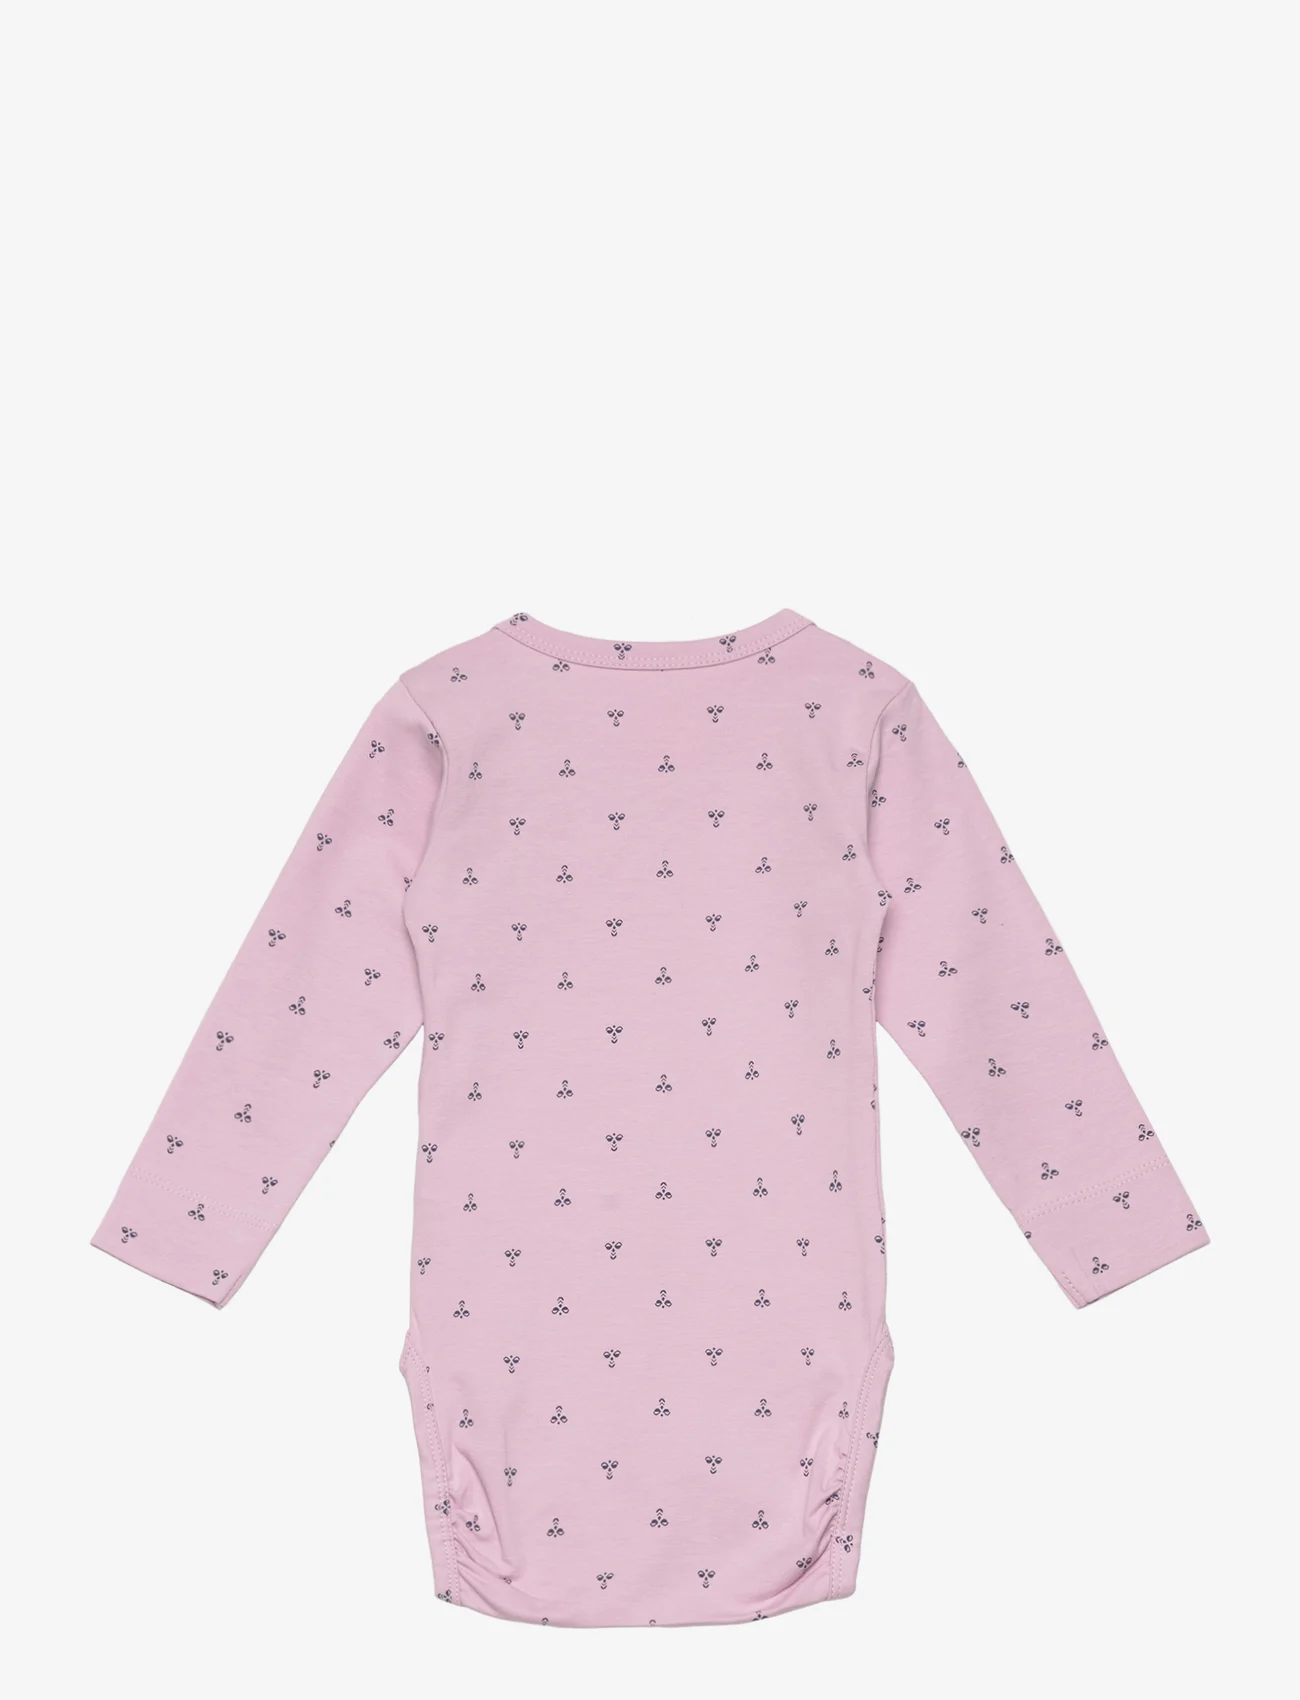 Hummel - hmlBEESY BODY L/S - lowest prices - winsome orchid - 1